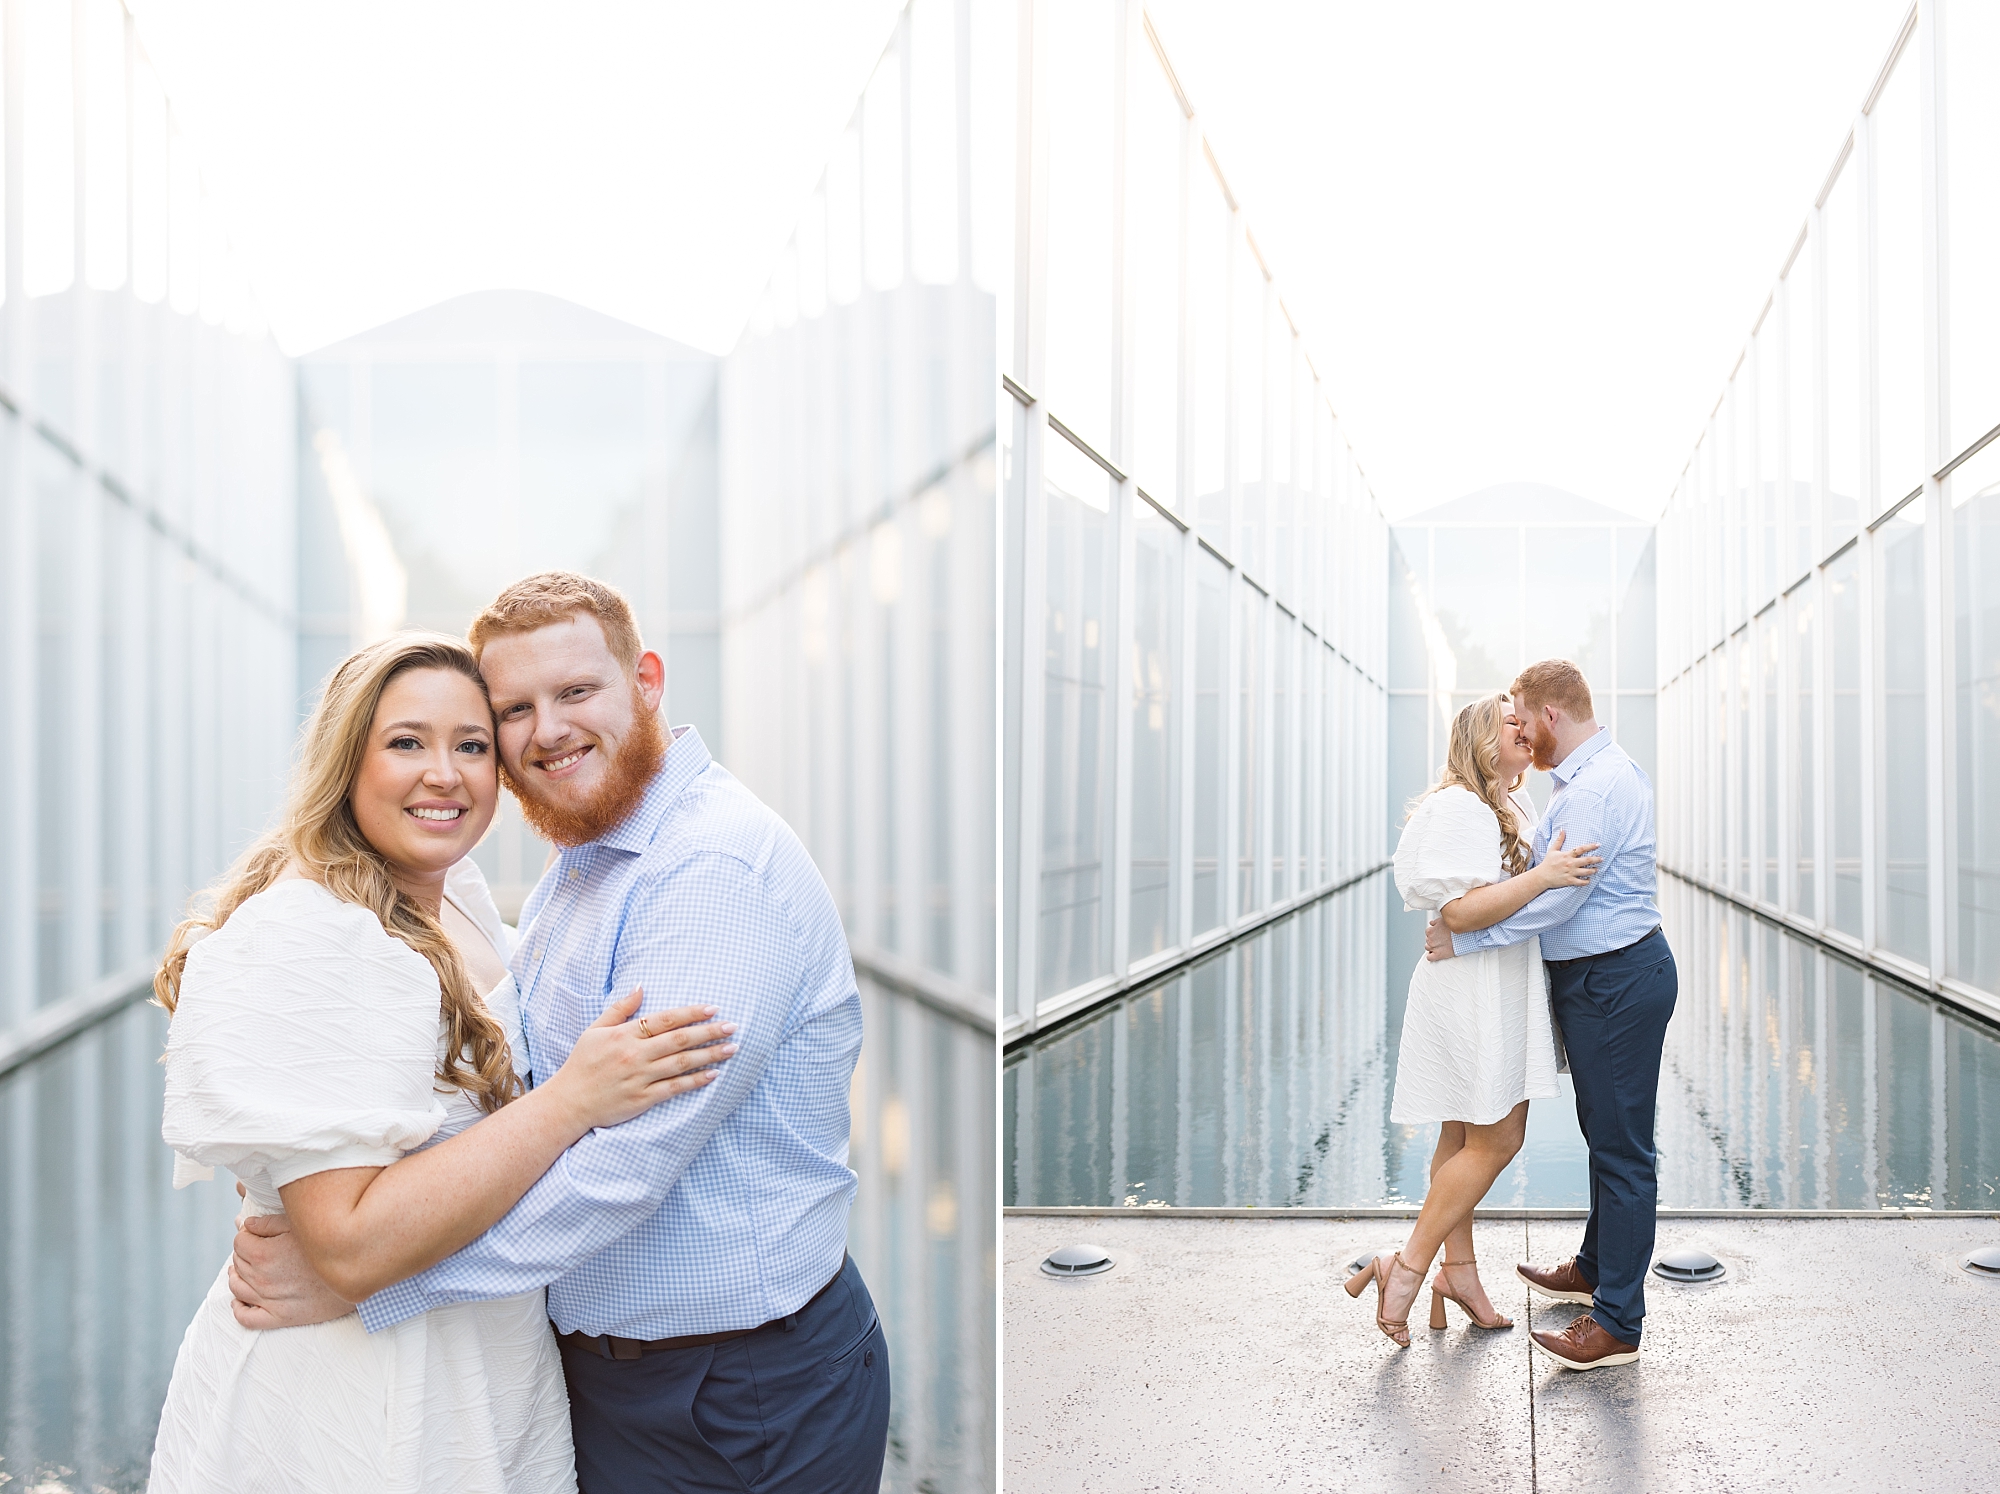 Clean and classic engagement photos in Raleigh| Raleigh NC Engagement Photographer